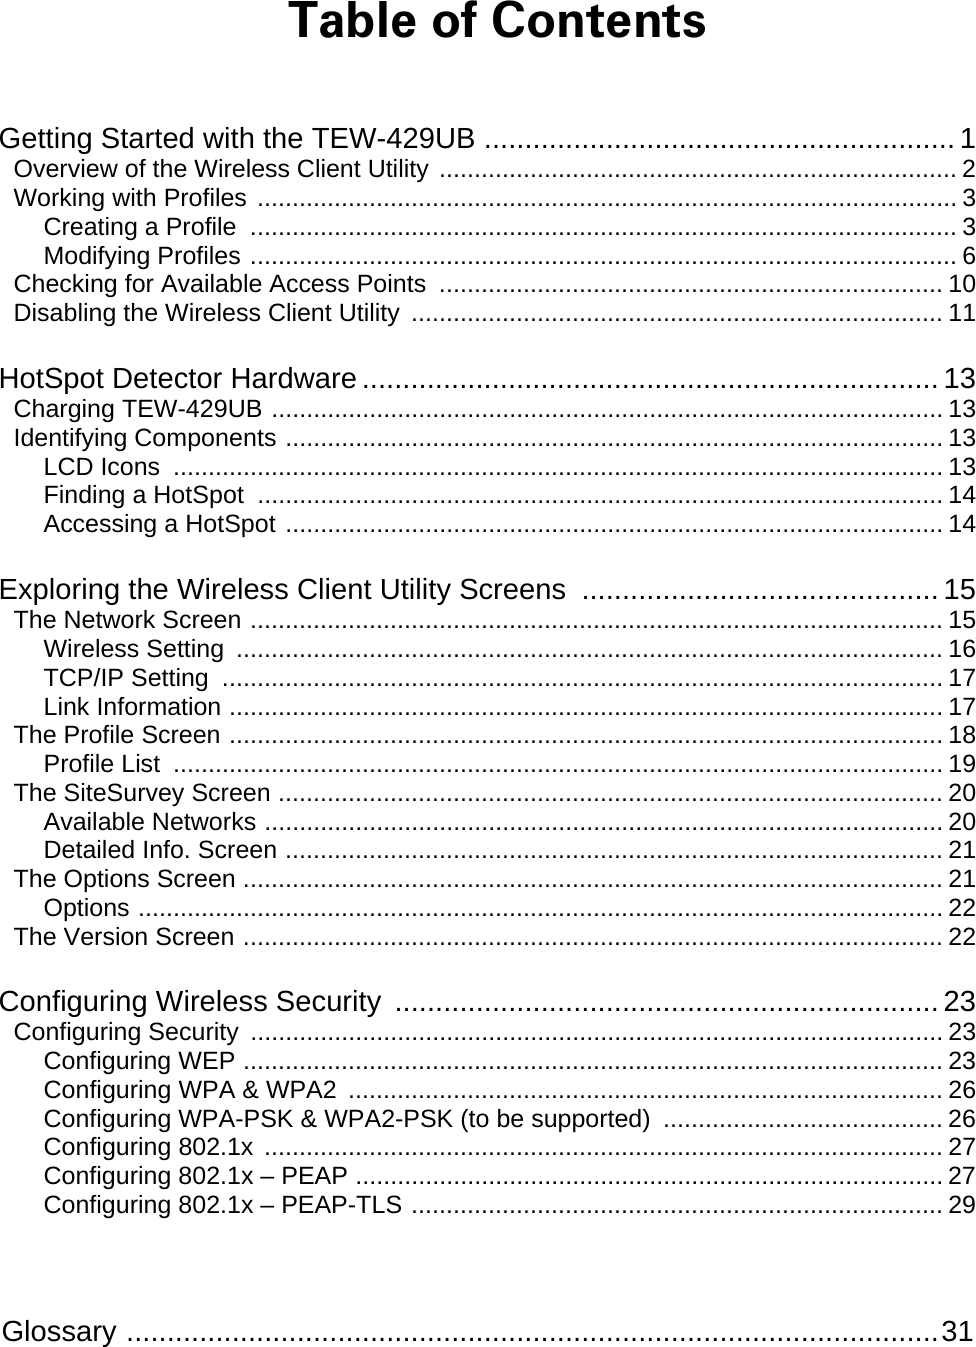  Glossary ....................................................................................................31 Table of Contents Getting Started with the TEW-429UB .......................................................... 1 Overview of the Wireless Client Utility .......................................................................... 2 Working with Profiles .................................................................................................... 3 Creating a Profile  ..................................................................................................... 3 Modifying Profiles ..................................................................................................... 6 Checking for Available Access Points  ........................................................................ 10 Disabling the Wireless Client Utility  ............................................................................ 11 HotSpot Detector Hardware ....................................................................... 13 Charging TEW-429UB ................................................................................................ 13 Identifying Components .............................................................................................. 13 LCD Icons .............................................................................................................. 13 Finding a HotSpot .................................................................................................. 14 Accessing a HotSpot .............................................................................................. 14 Exploring the Wireless Client Utility Screens  ............................................ 15 The Network Screen ................................................................................................... 15 Wireless Setting  ..................................................................................................... 16 TCP/IP Setting  ....................................................................................................... 17 Link Information ...................................................................................................... 17 The Profile Screen ...................................................................................................... 18 Profile List .............................................................................................................. 19 The SiteSurvey Screen ............................................................................................... 20 Available Networks ................................................................................................. 20 Detailed Info. Screen .............................................................................................. 21 The Options Screen .................................................................................................... 21 Options ................................................................................................................... 22 The Version Screen .................................................................................................... 22 Configuring Wireless Security  ................................................................... 23 Configuring Security ................................................................................................... 23 Configuring WEP .................................................................................................... 23 Configuring WPA &amp; WPA2 ..................................................................................... 26 Configuring WPA-PSK &amp; WPA2-PSK (to be supported) ........................................ 26 Configuring 802.1x ................................................................................................. 27 Configuring 802.1x – PEAP .................................................................................... 27 Configuring 802.1x – PEAP-TLS ............................................................................ 29 